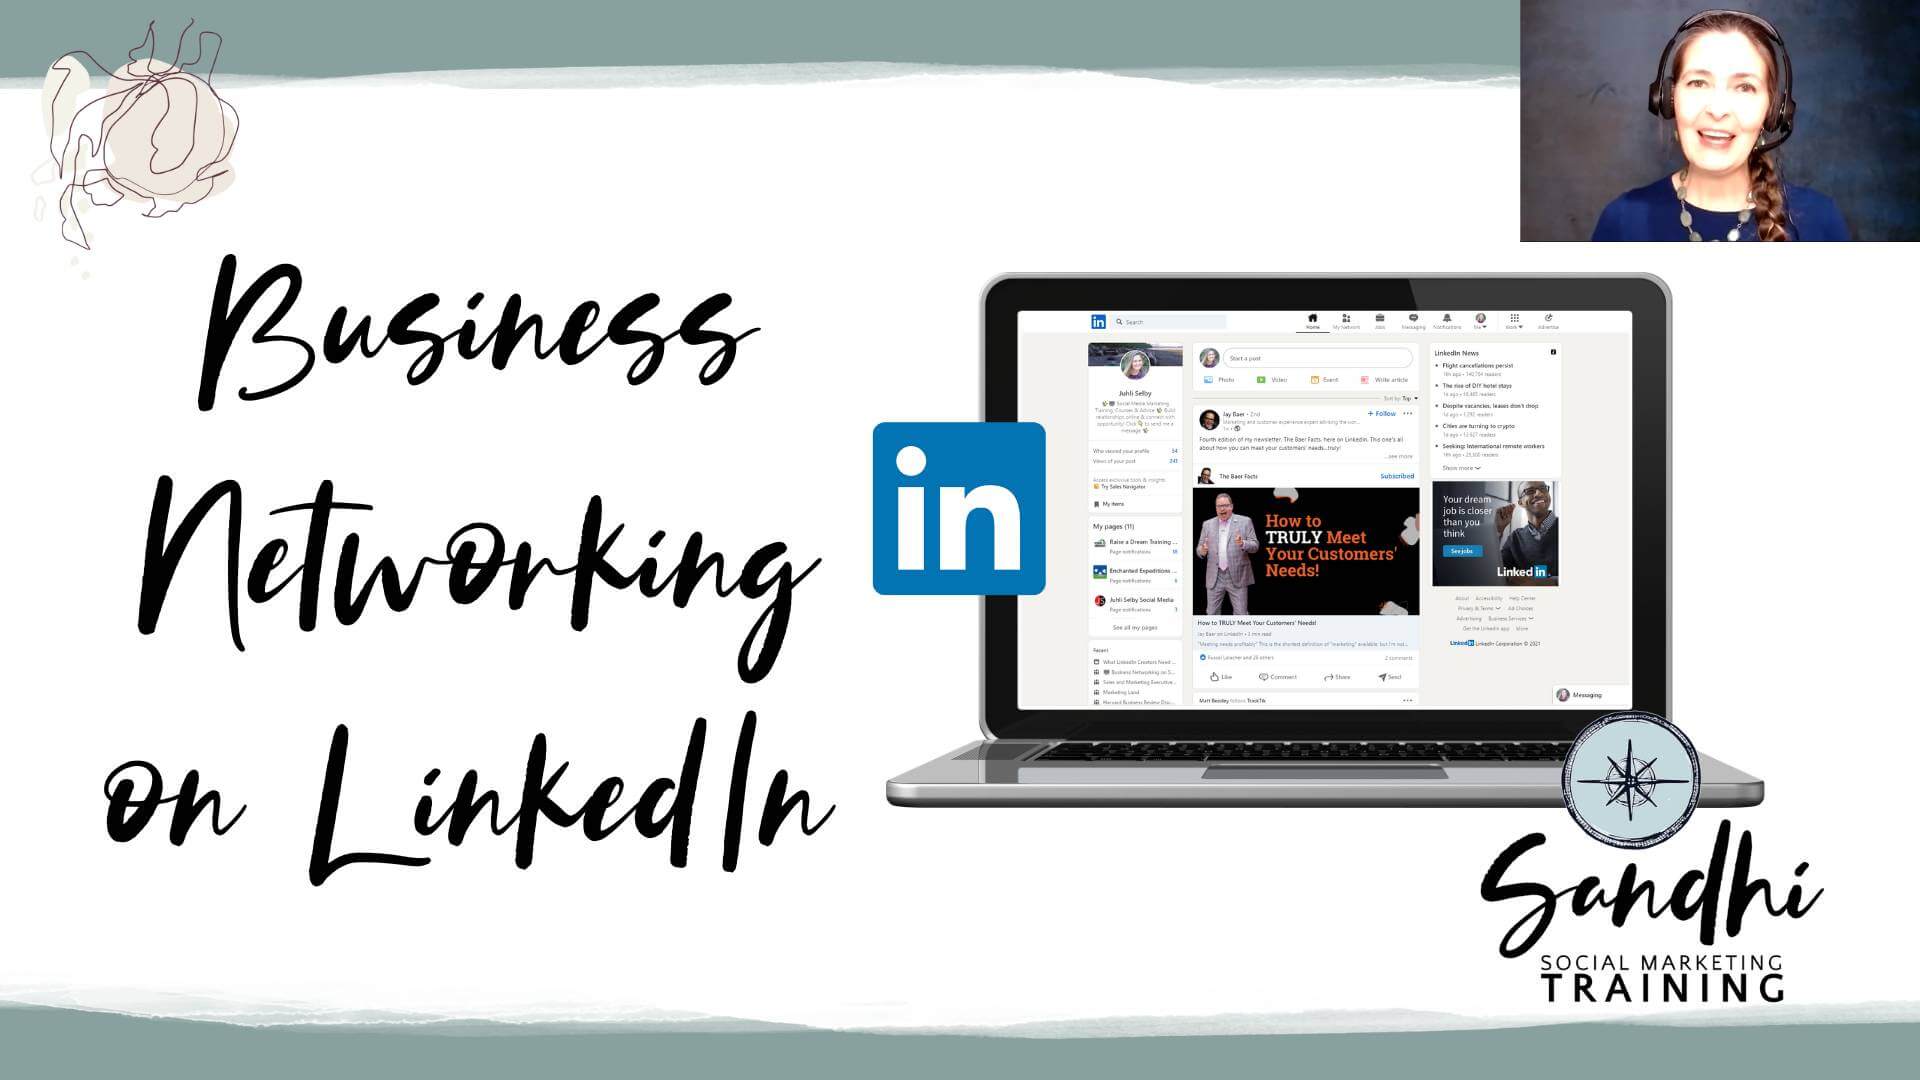 Business Networking on LinkedIn 4 week course with social media instructor Juhli Selby